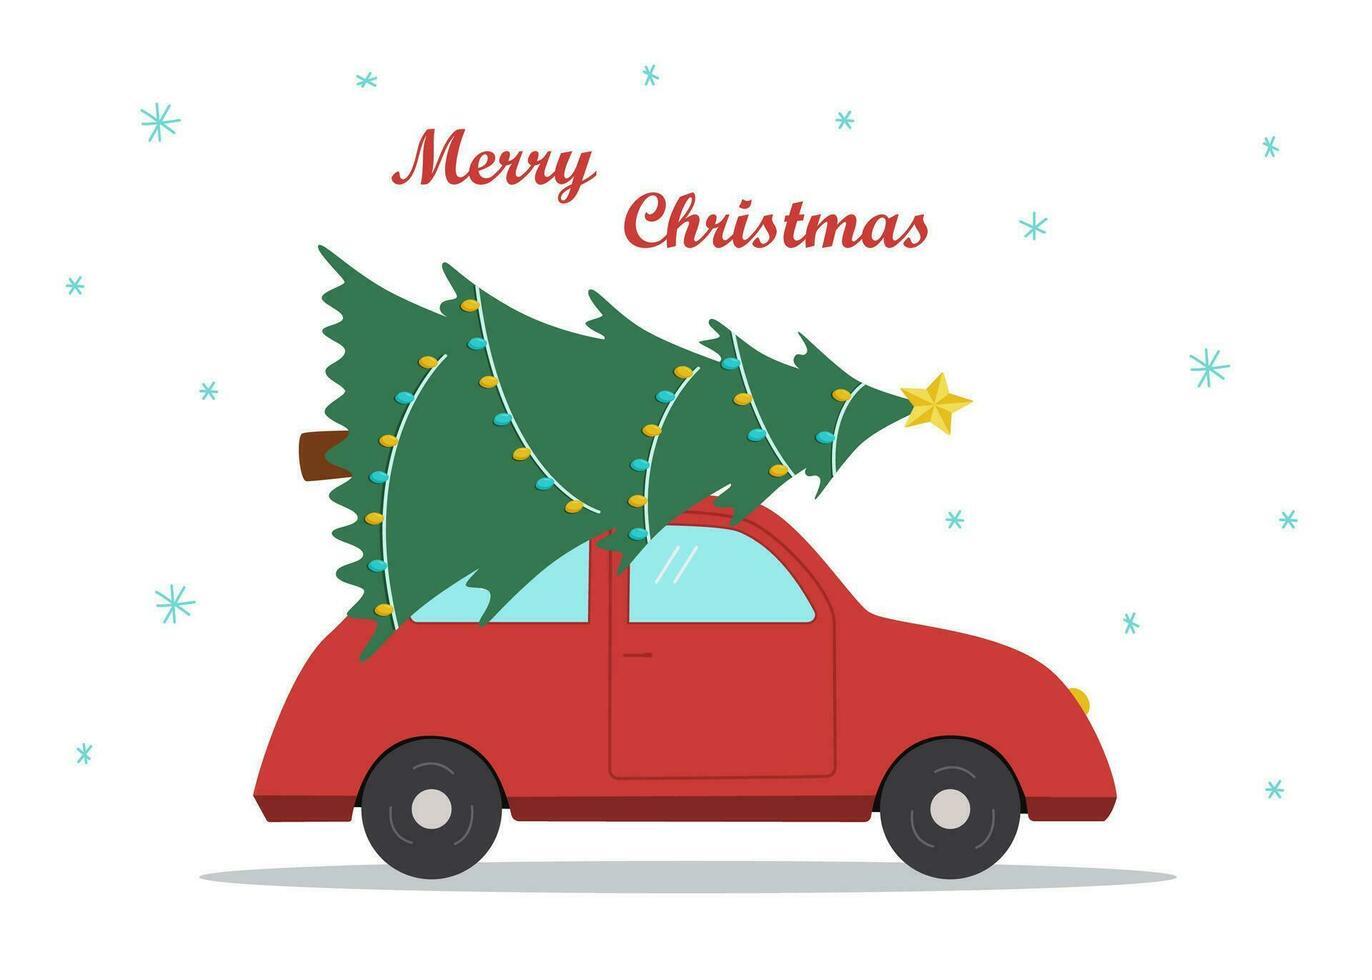 A small cartoon car is carrying a Christmas tree on the roof. Vector illustration. Happy New Year and Merry Christmas greeting card.